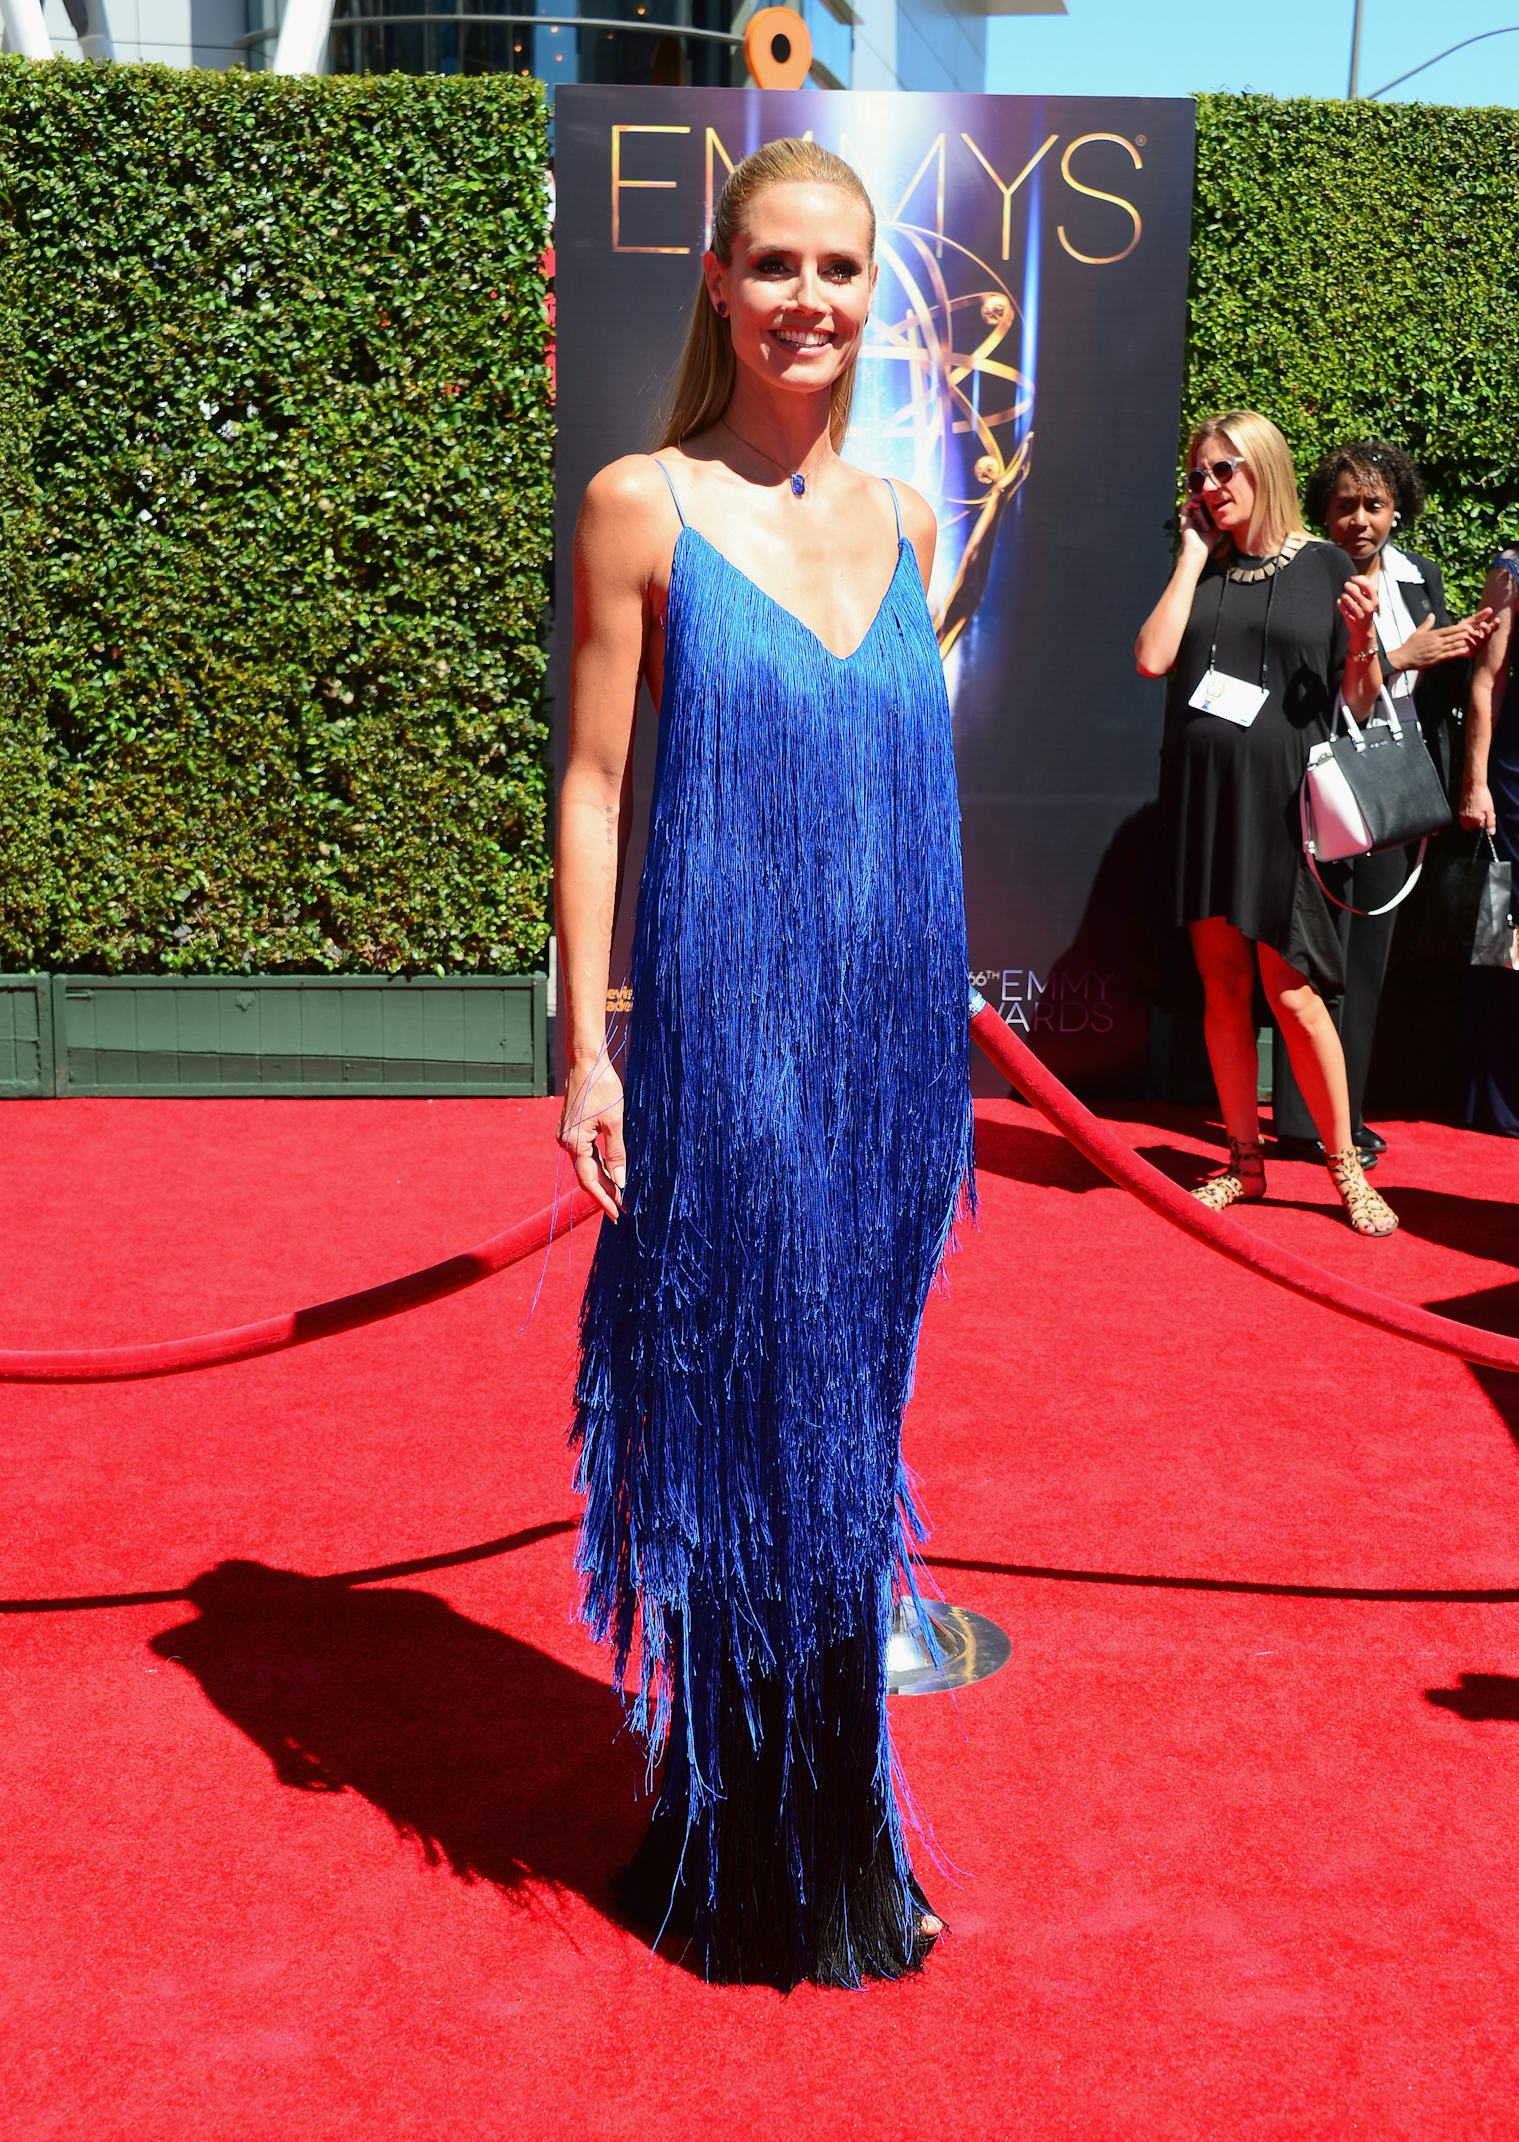 Heidi Klum's Creative Arts Emmys Dress Was Designed By a 'Project